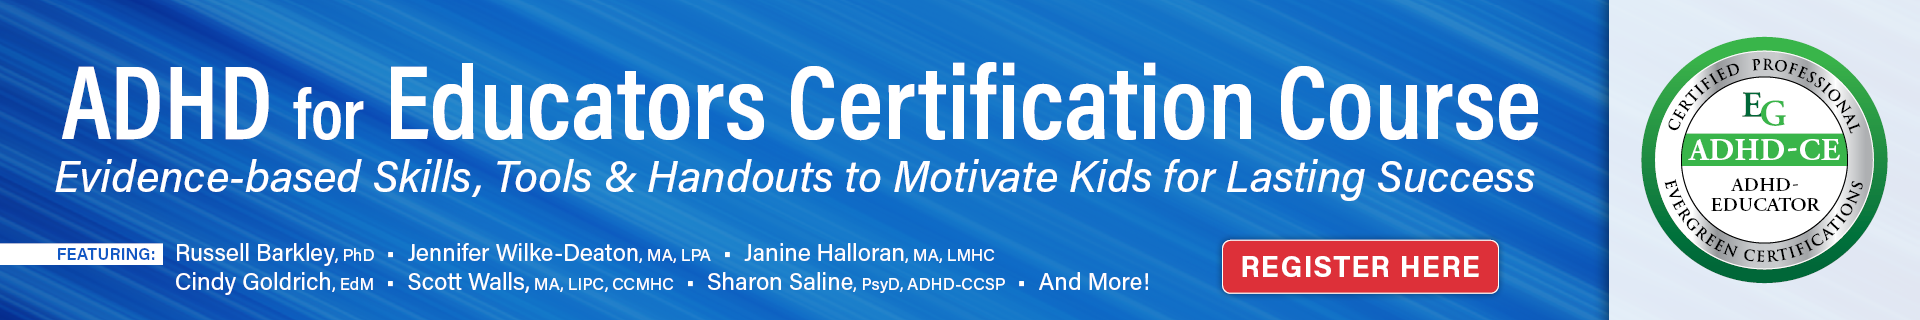 ADHD for Educators Certification Course: Evidence-based Skills, Tools & Handouts to Motivate Kids for Lasting Success